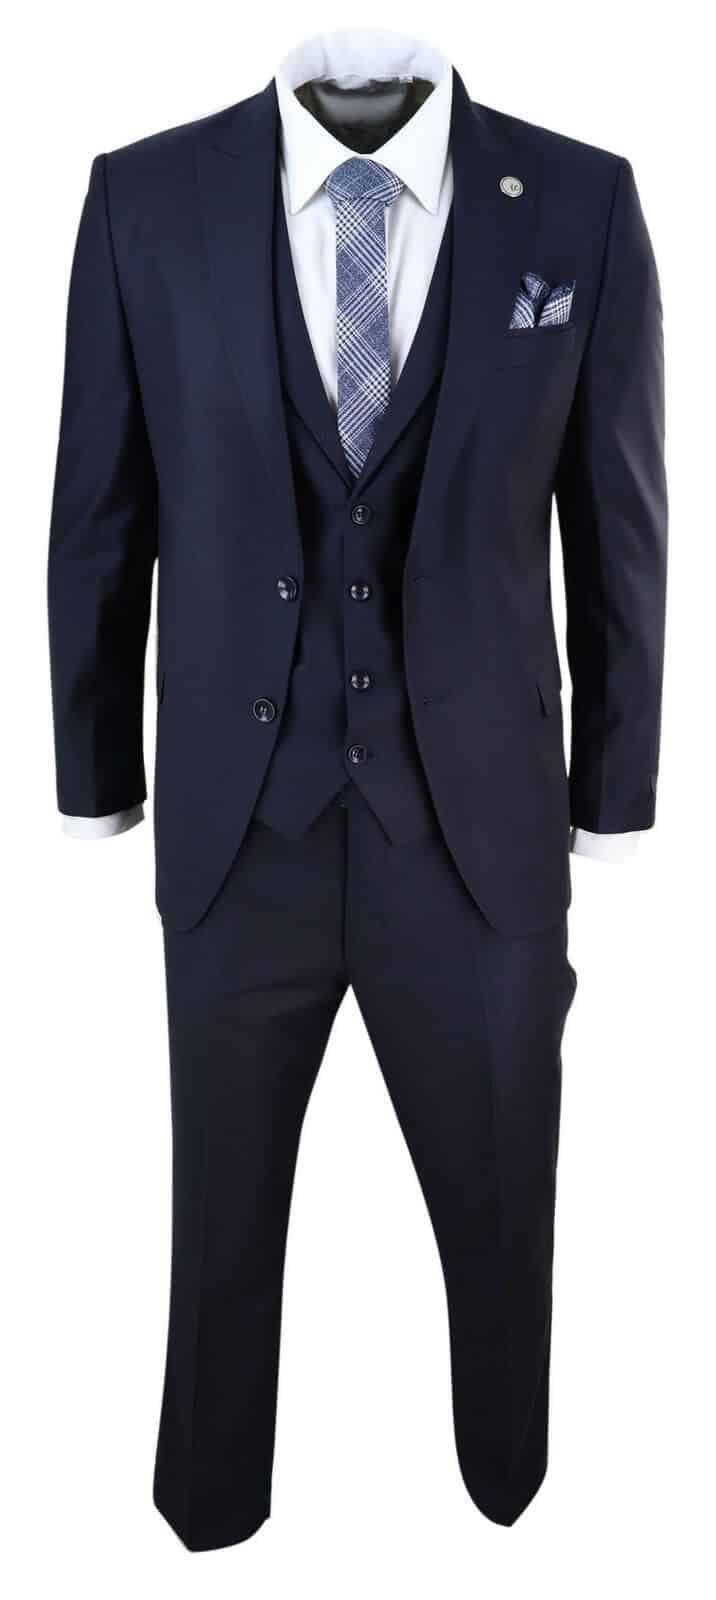 New Mens 3 Piece Suit Plain Navy Classic Tailored Fit Smart Casual 1920s Formal